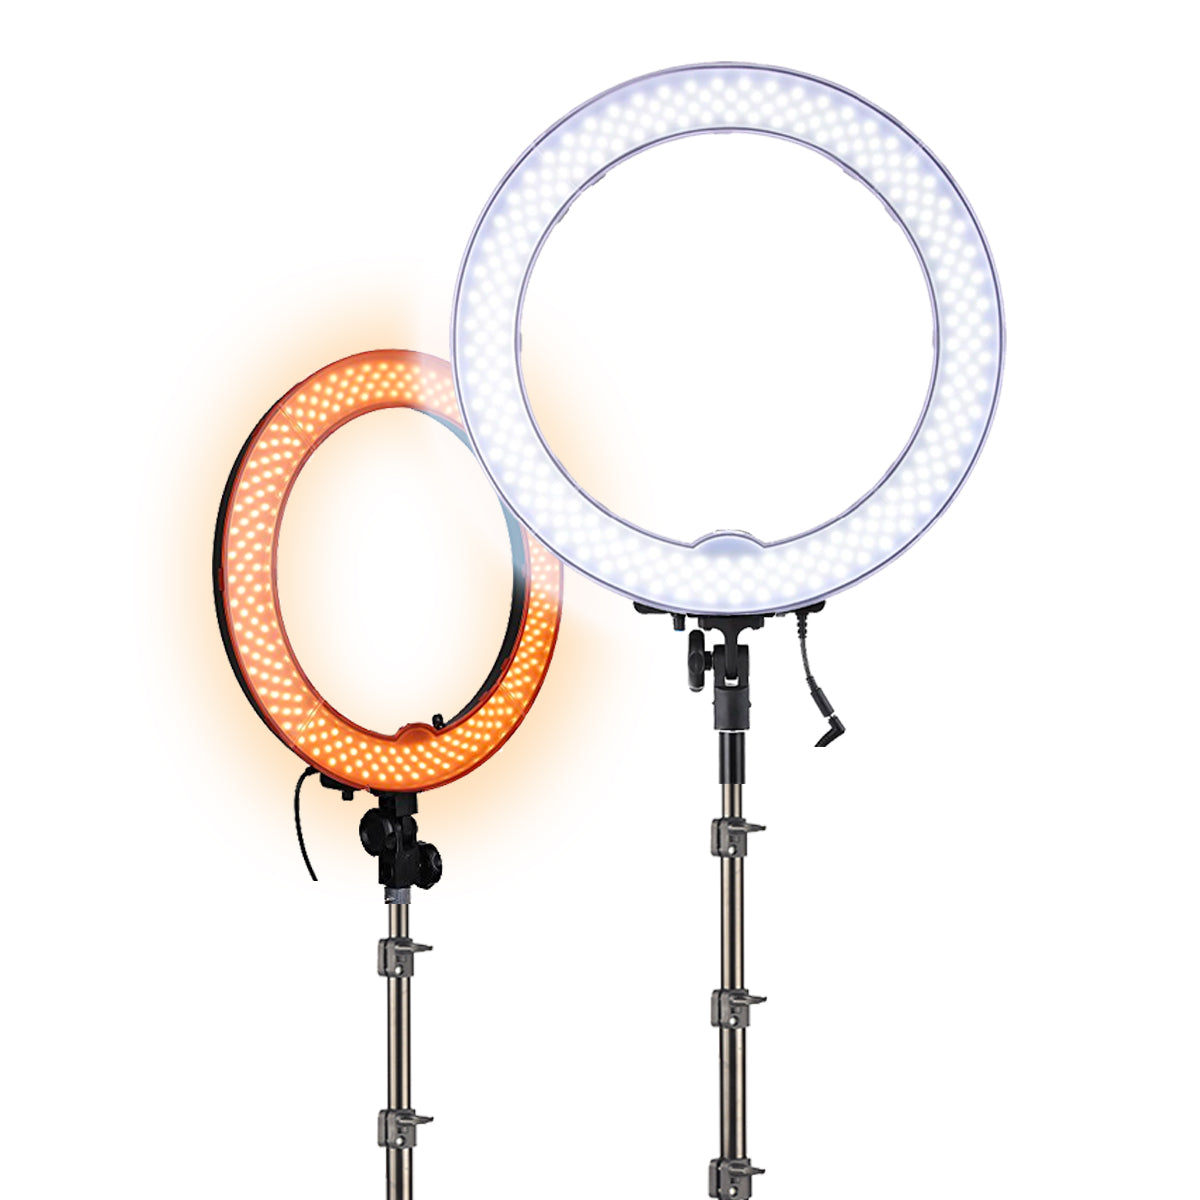 NEEWER RGB18-APP 18 Inches RGB Ring Light with APP Control - NEEWER